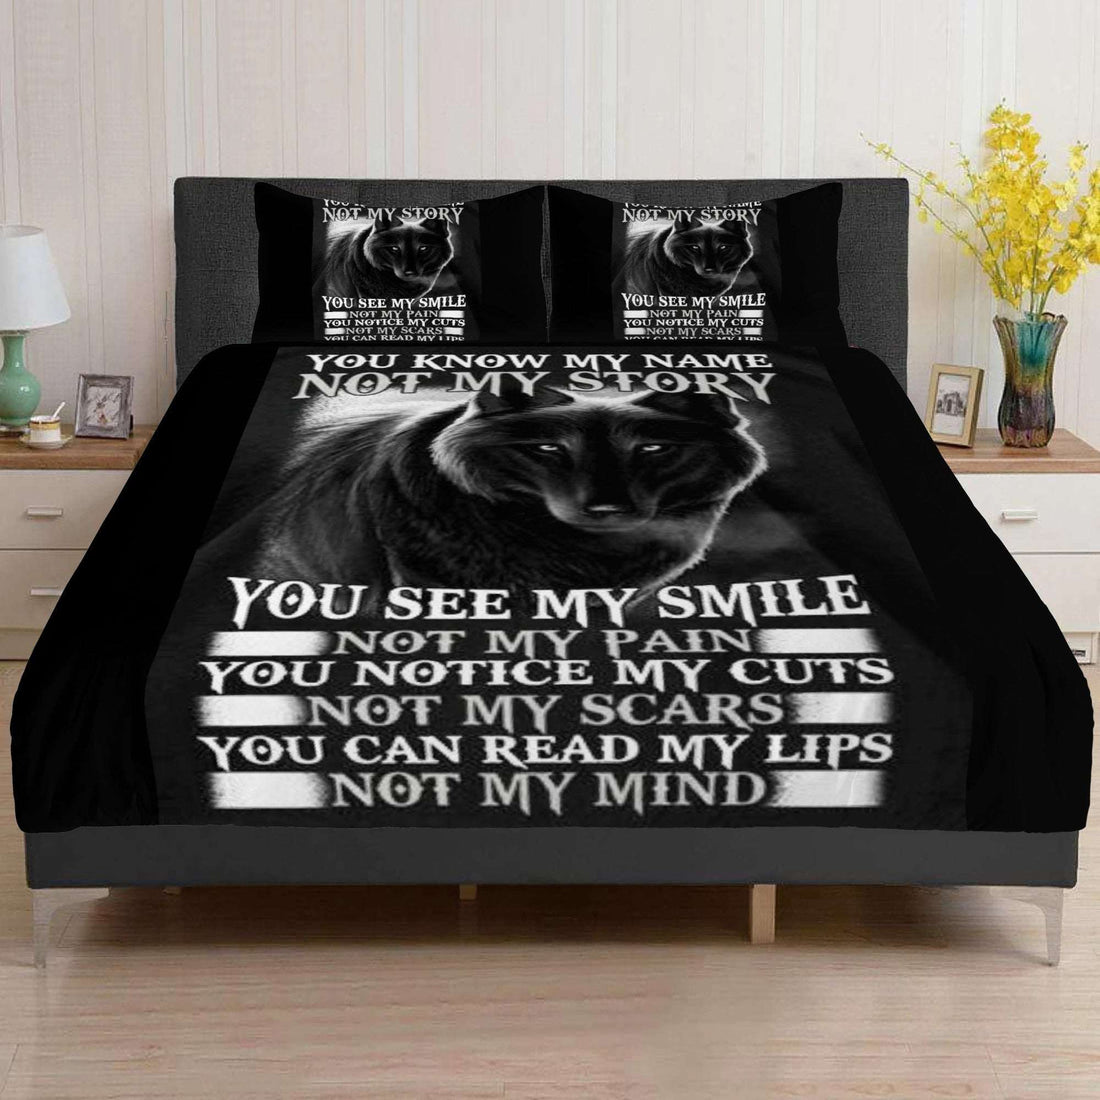 Bedding Wolf Black and White Home-clothes-jewelry